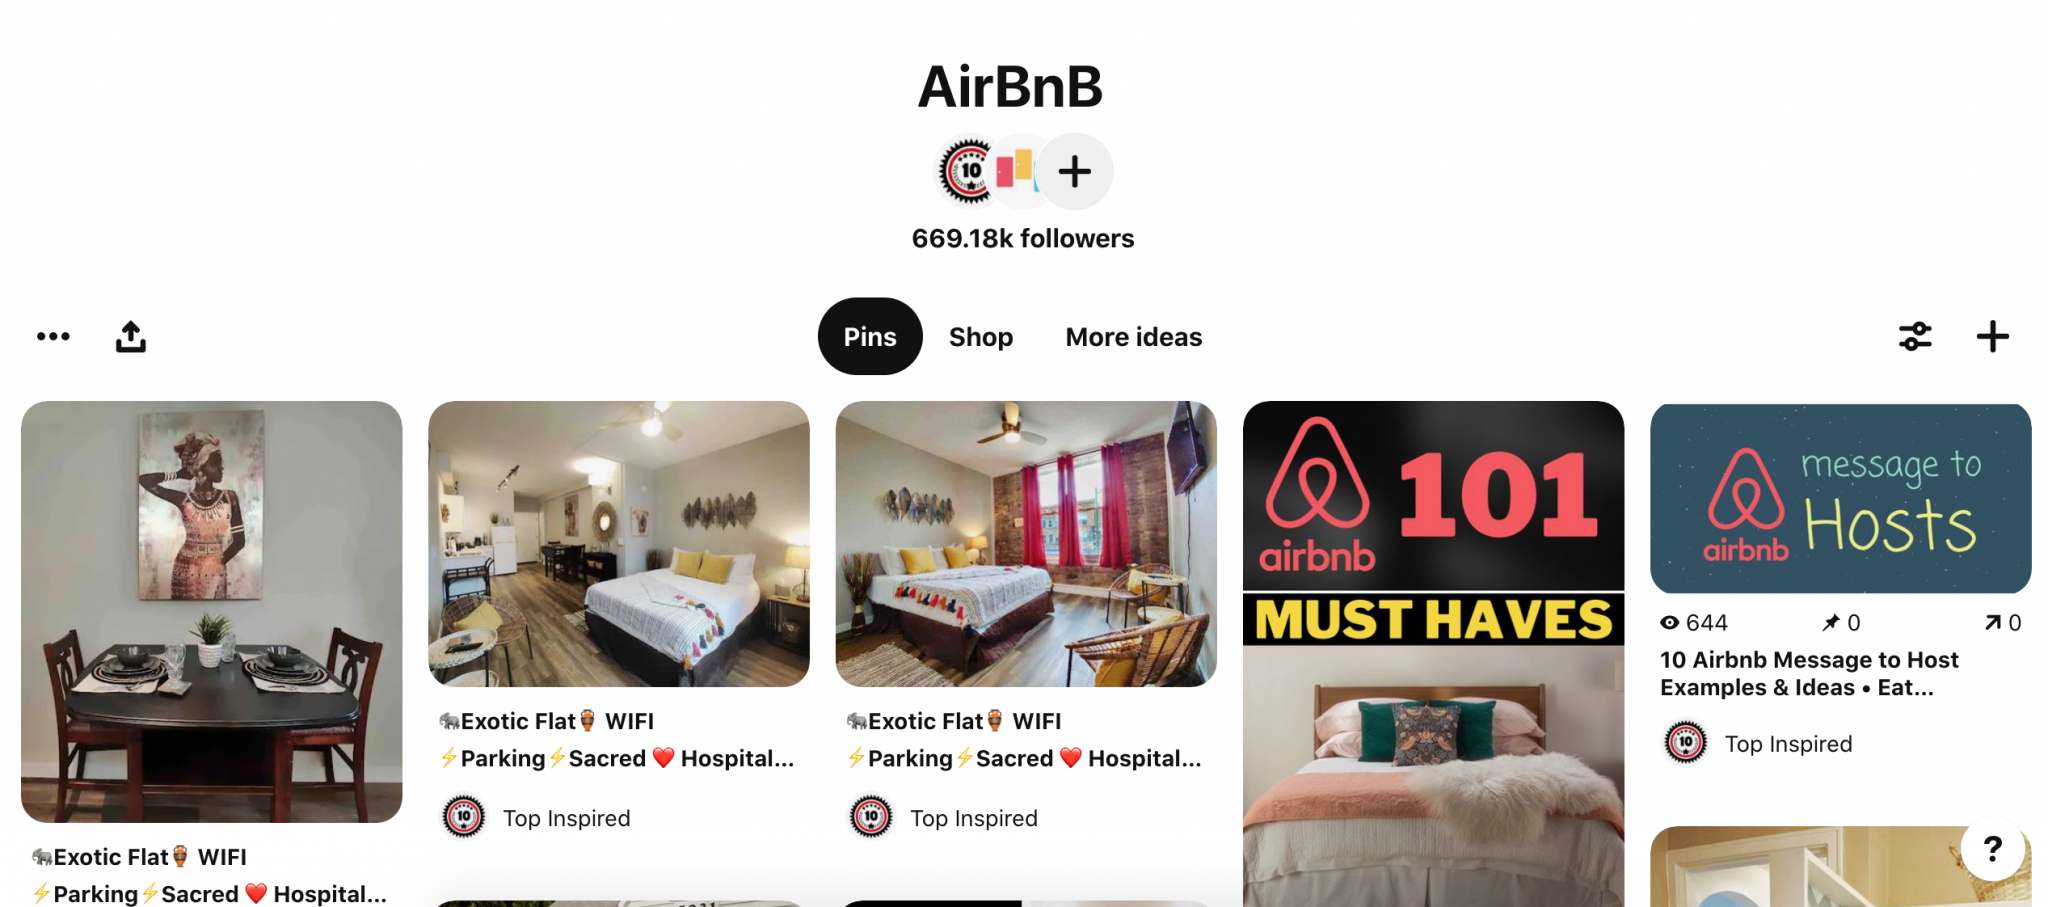 advertise your airbnb